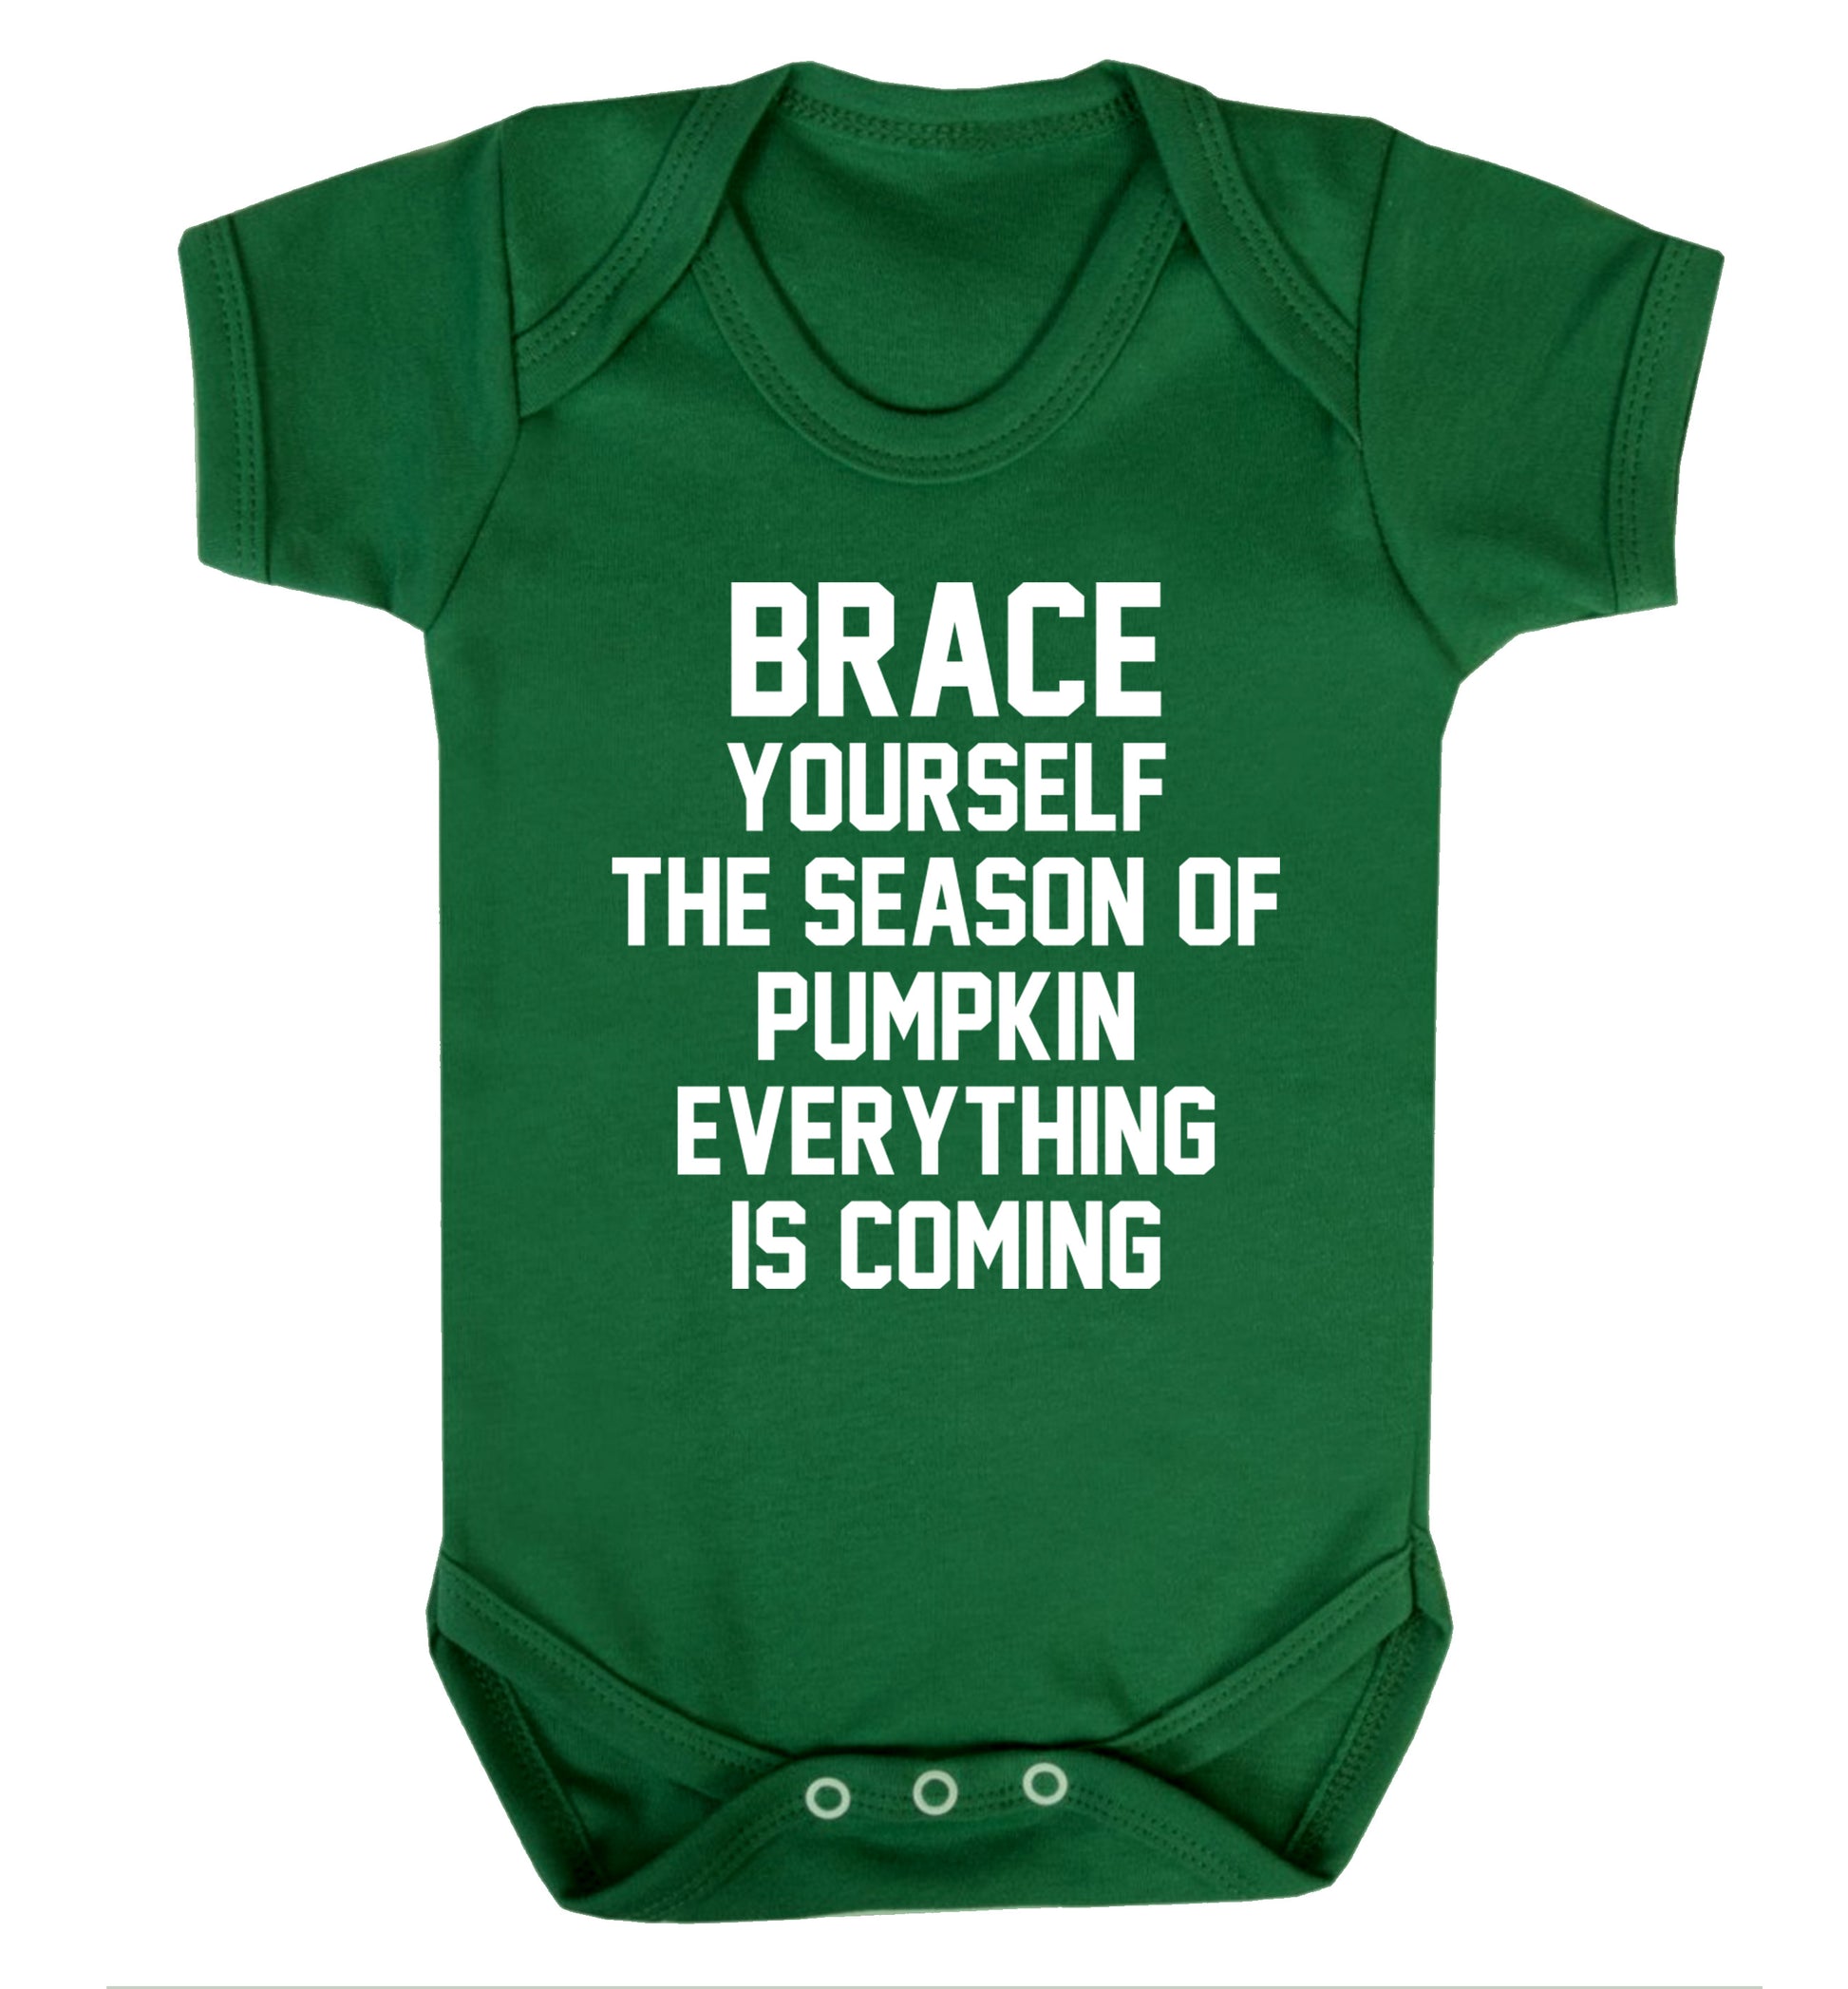 Brace yourself the season of pumpkin everything is coming Baby Vest green 18-24 months